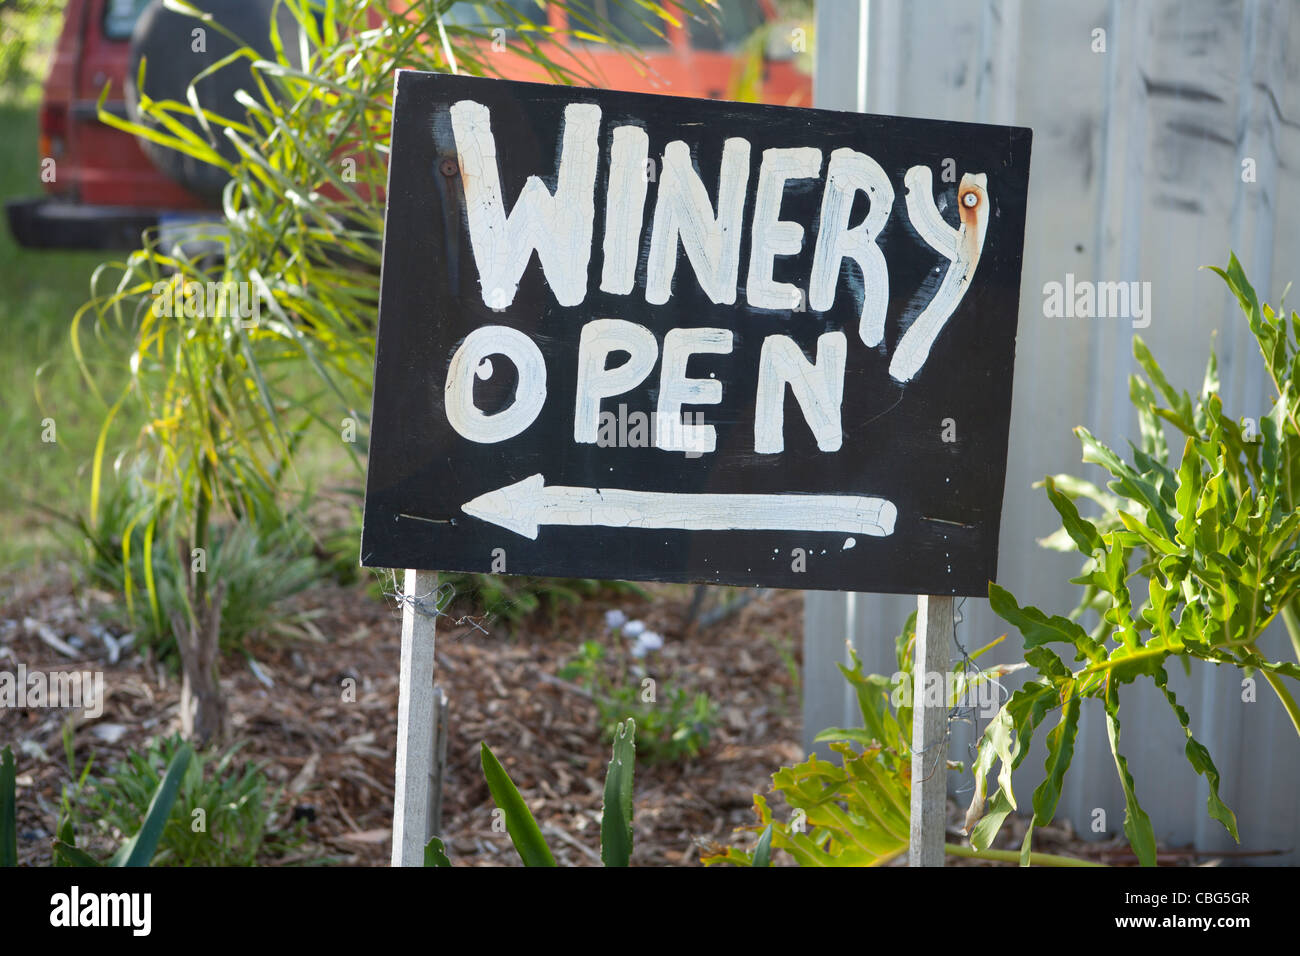 Winery open sign in the Margaret River region of Western Australia. Stock Photo